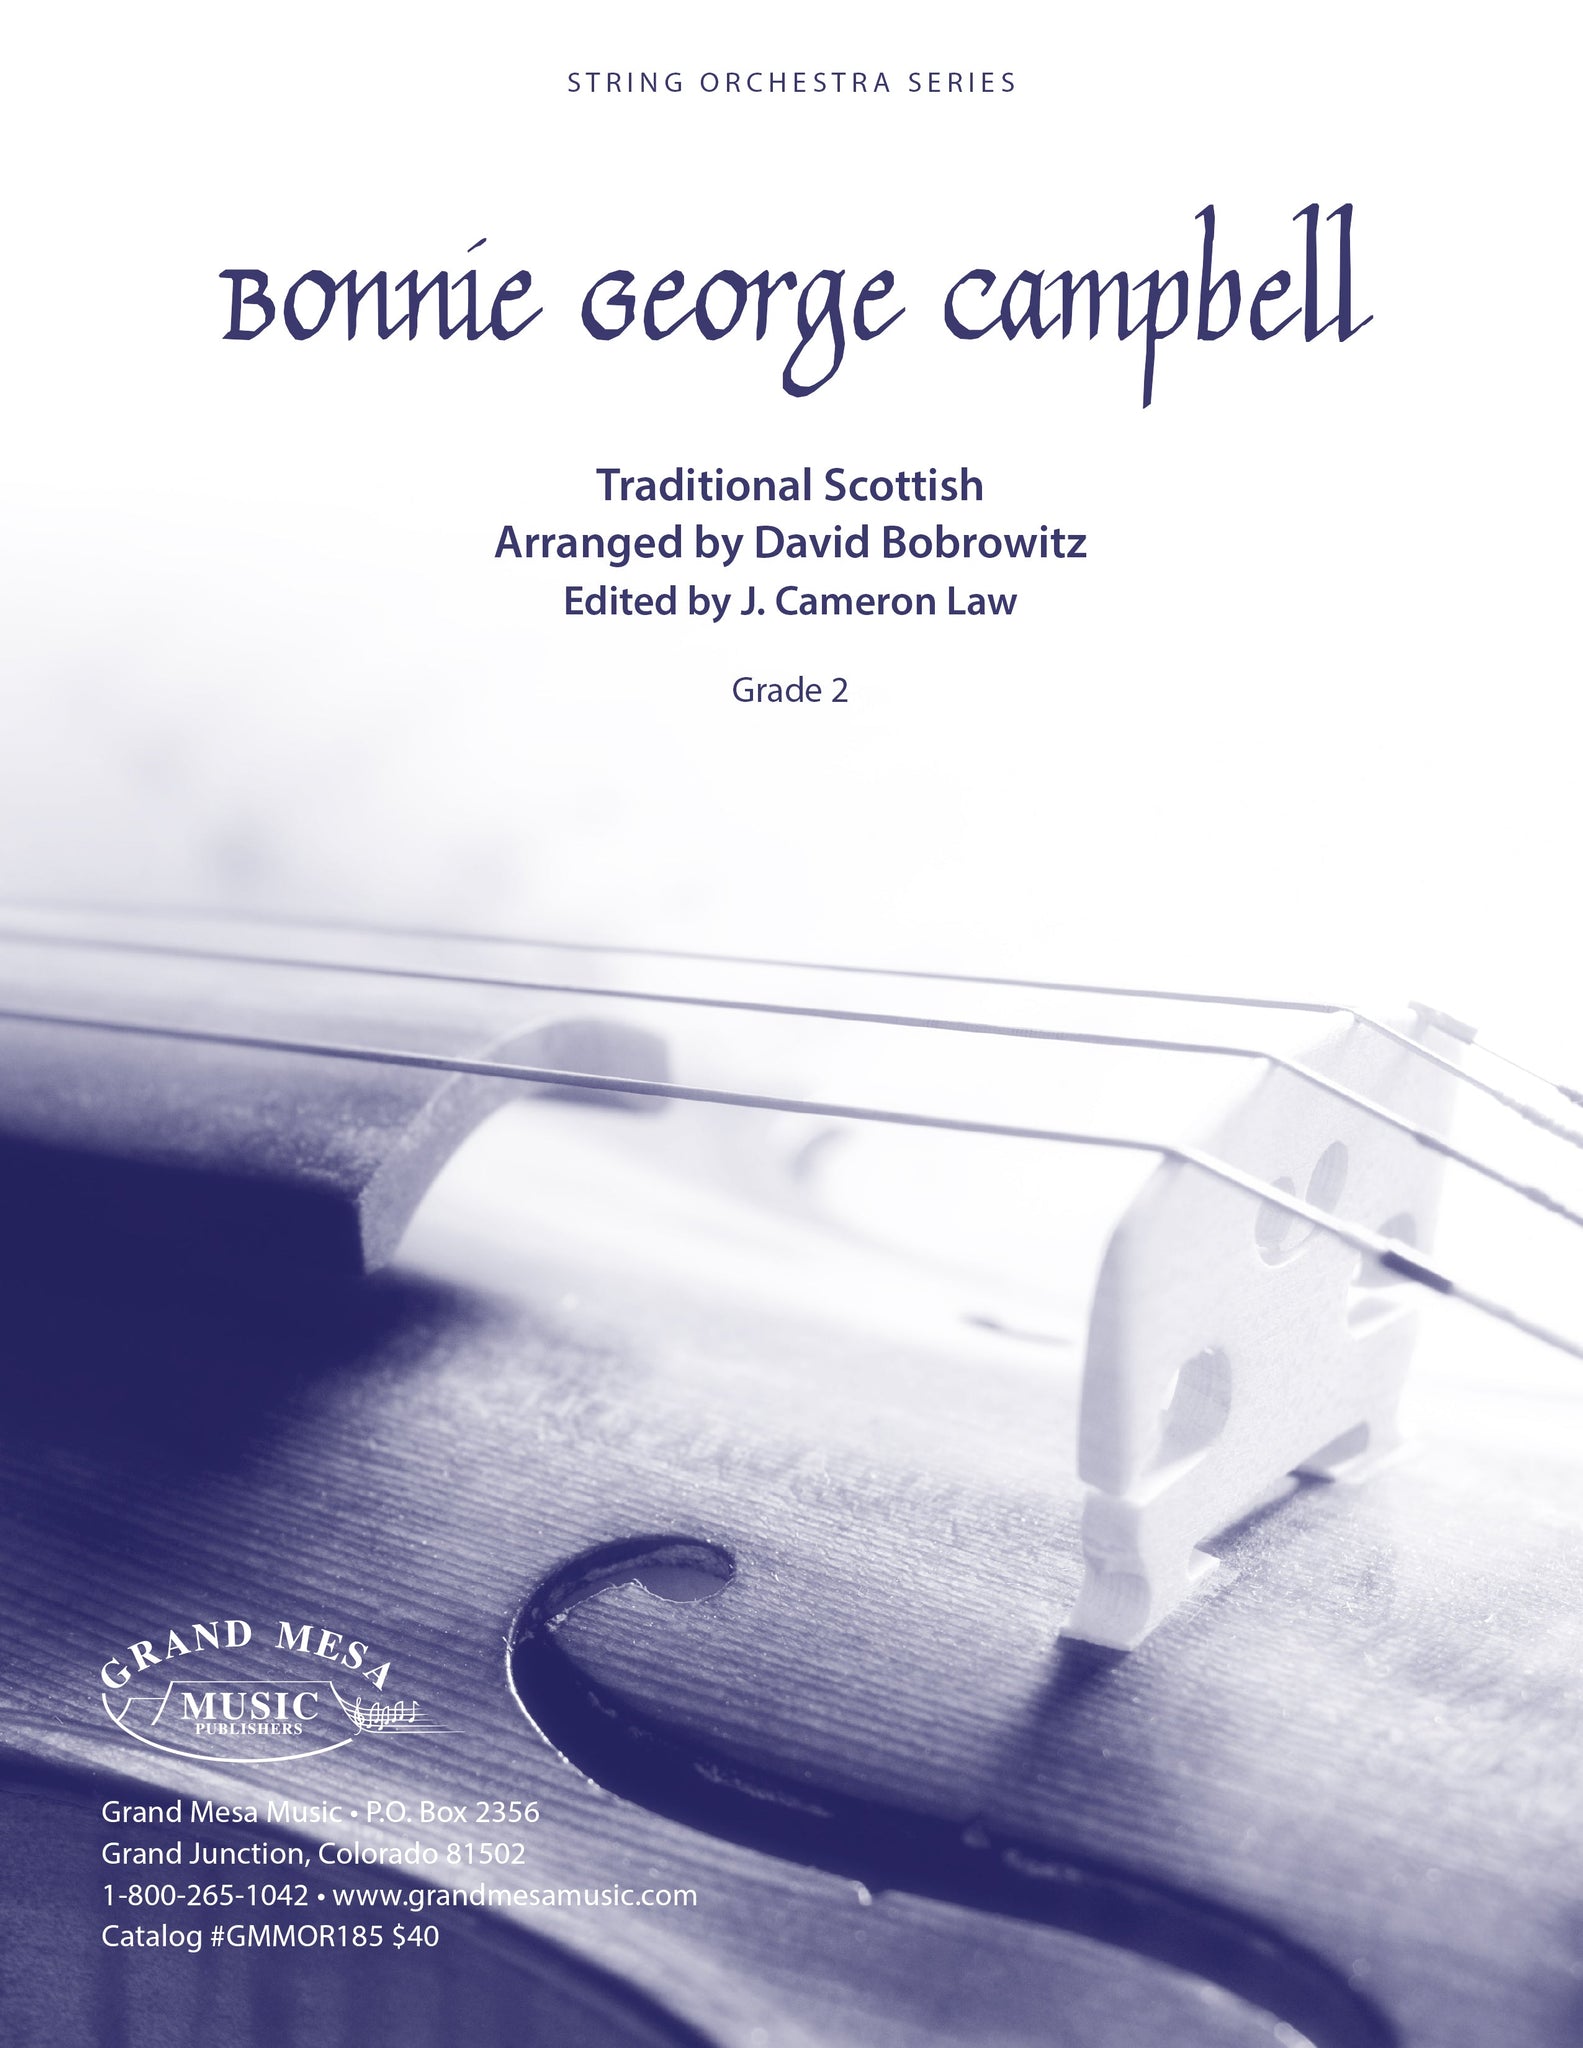 Strings sheet music cover of Bonnie George Campbell, composed by David Bobrowitz.